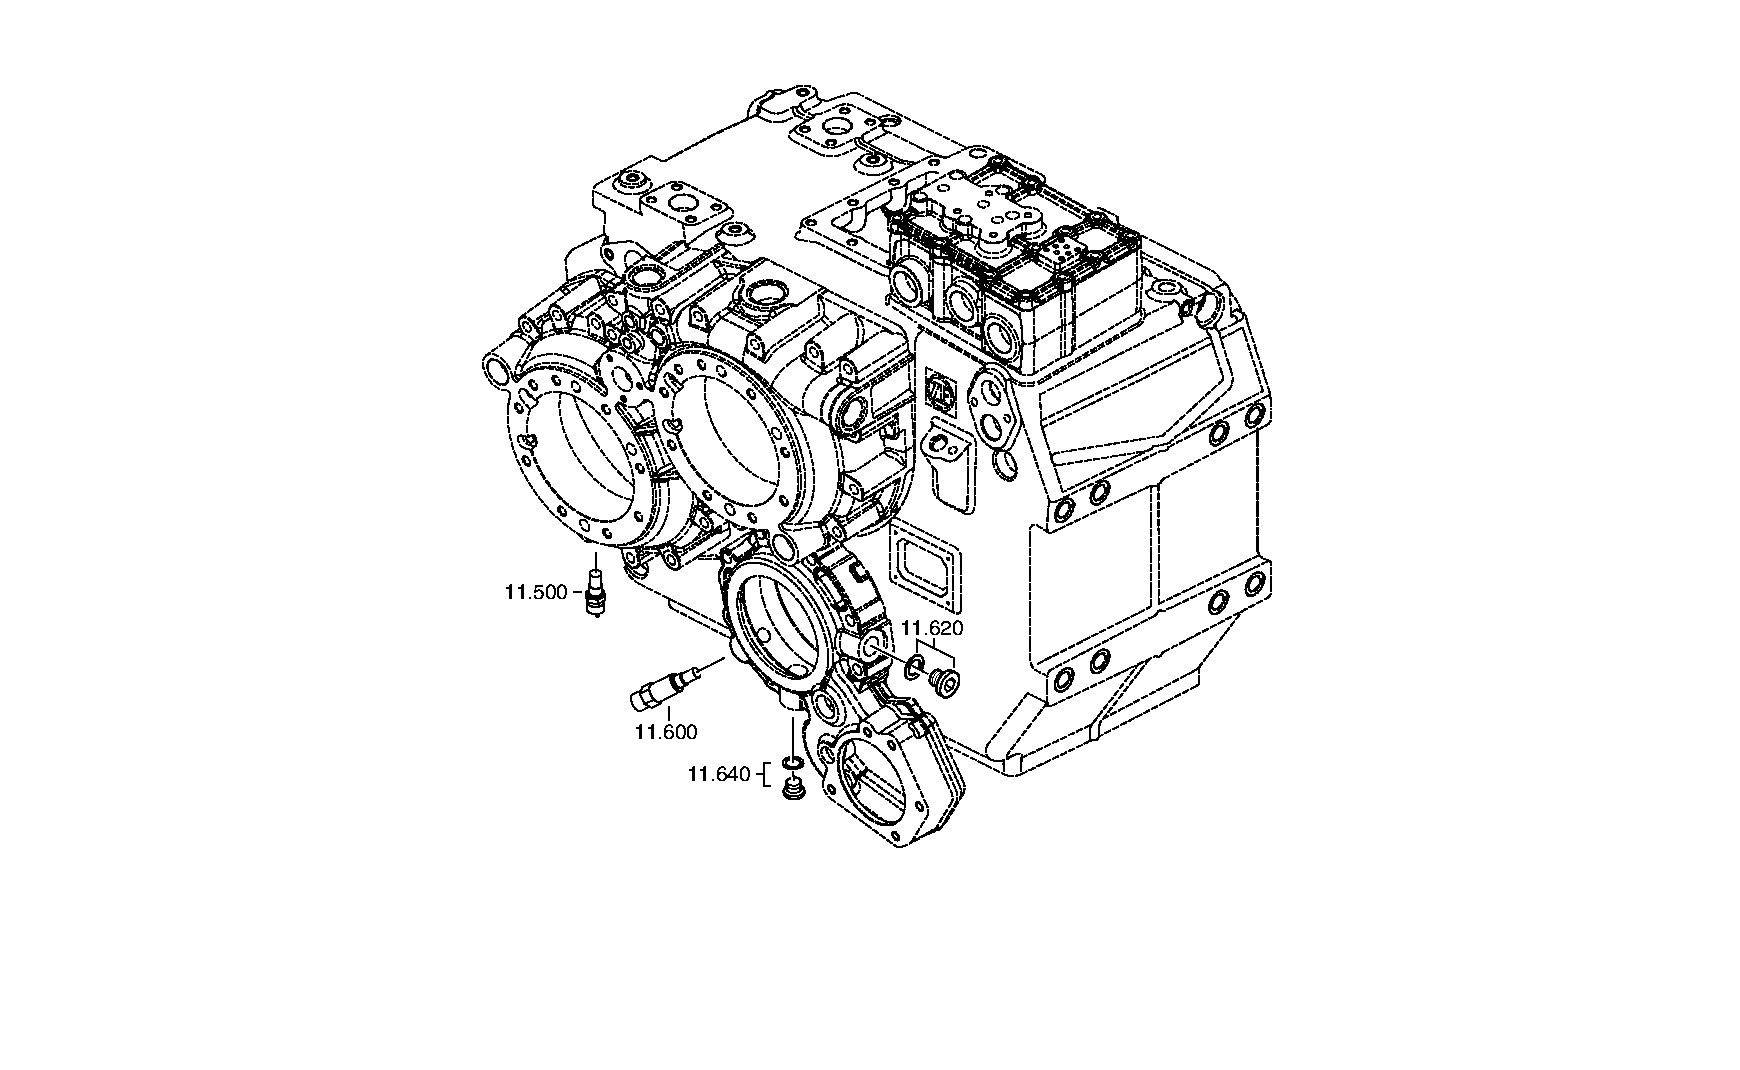 drawing for LANG GMBH 570269708 - INDUCTIVE TRANSMITTER (figure 2)